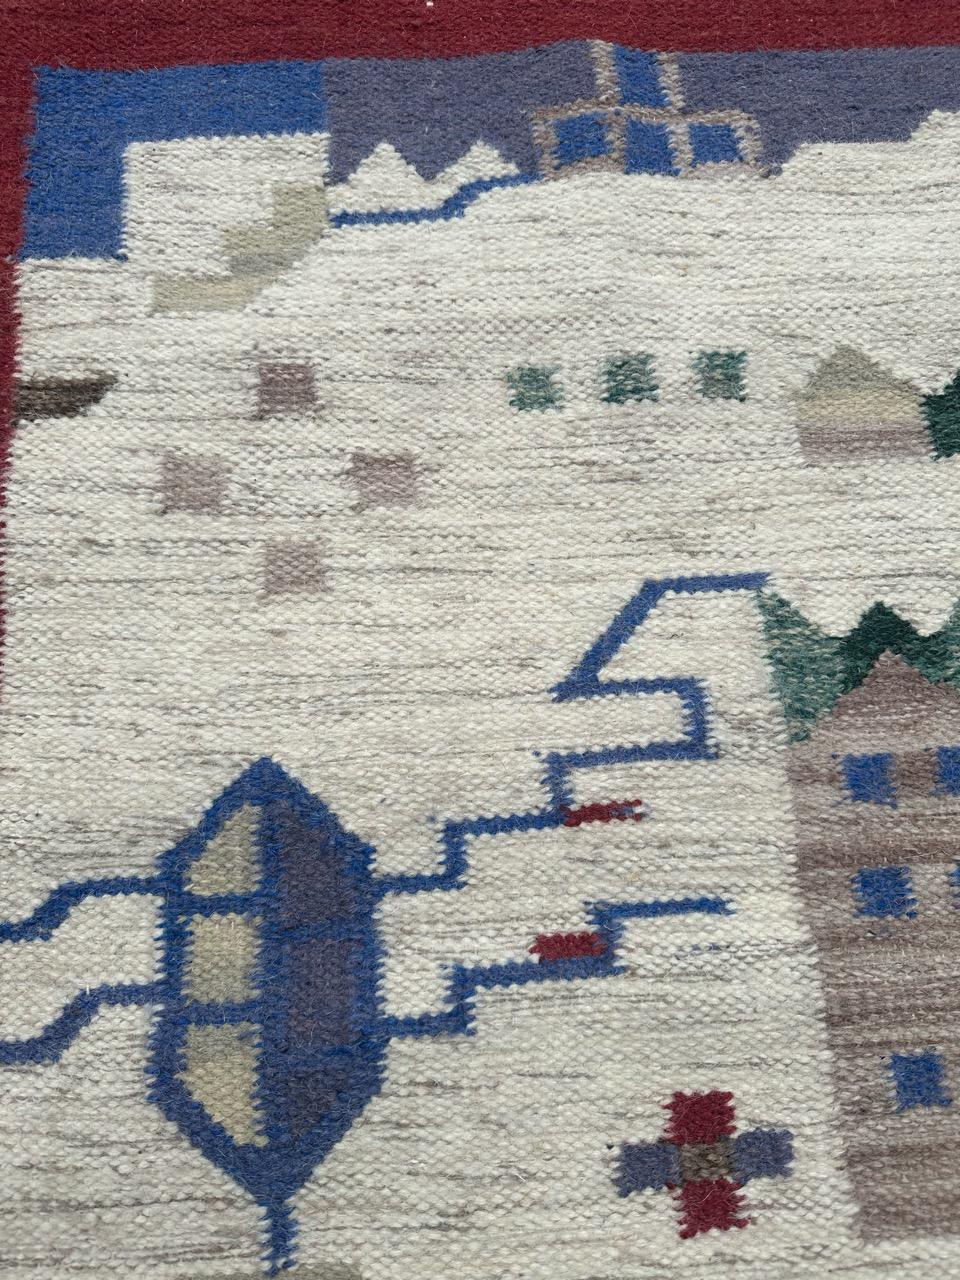 Hand-Woven Bobyrug’s Pretty Vintage Woven Polish Tapestry For Sale